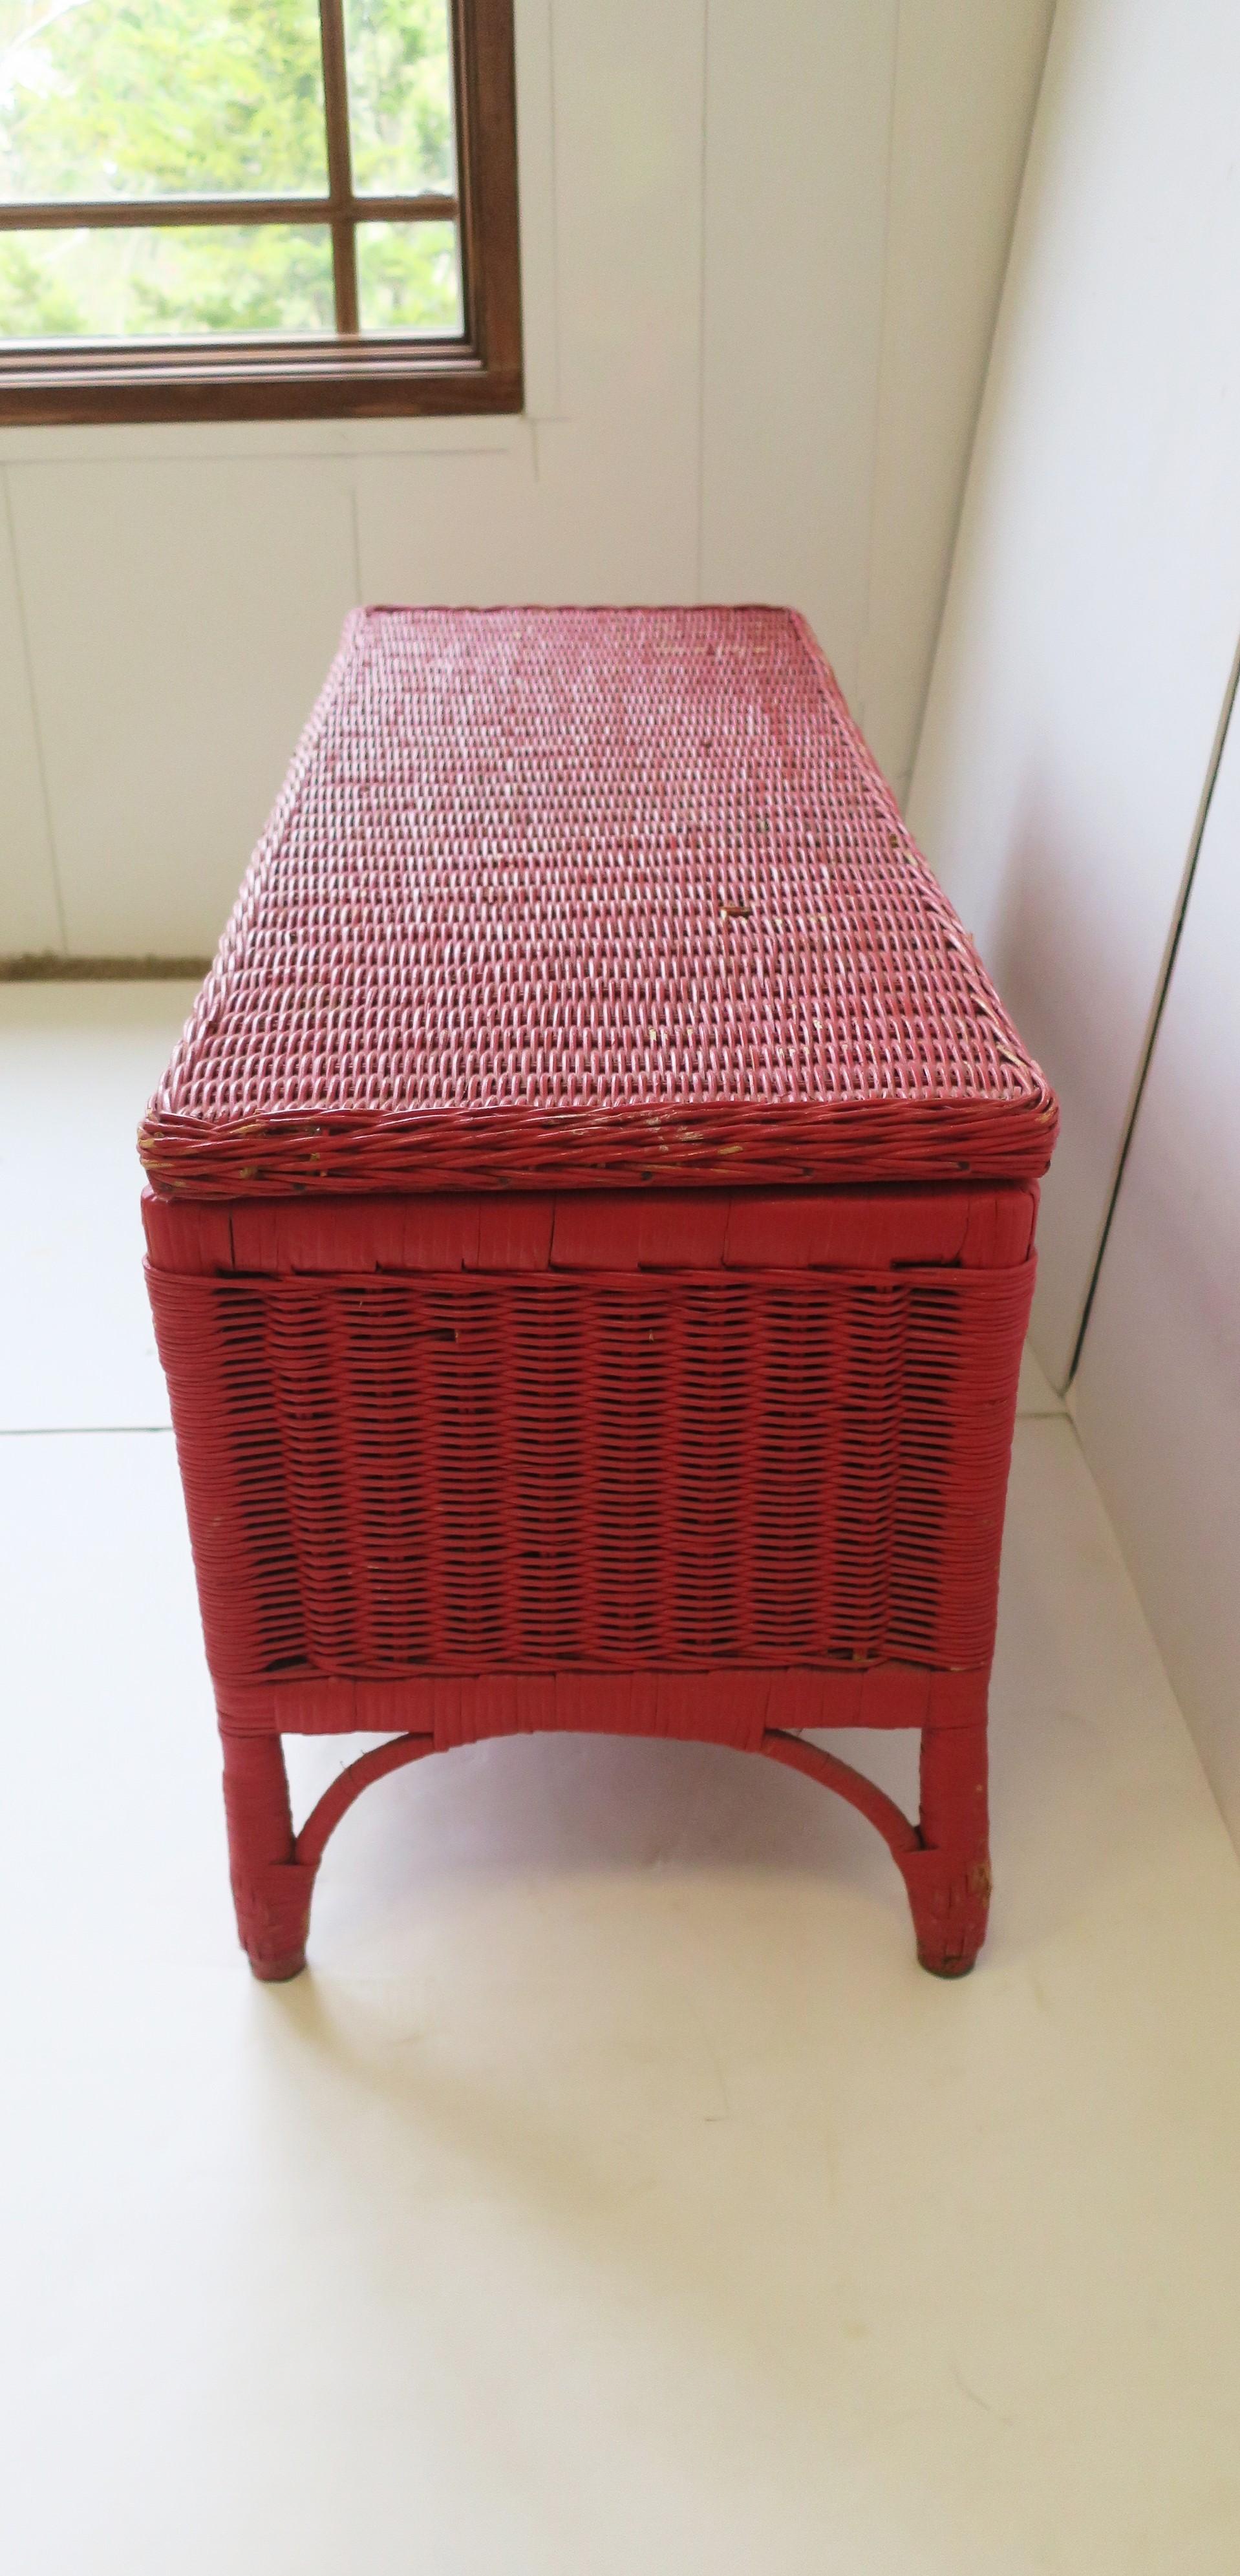 Vintage Red Wicker Rattan Bench with Storage 3